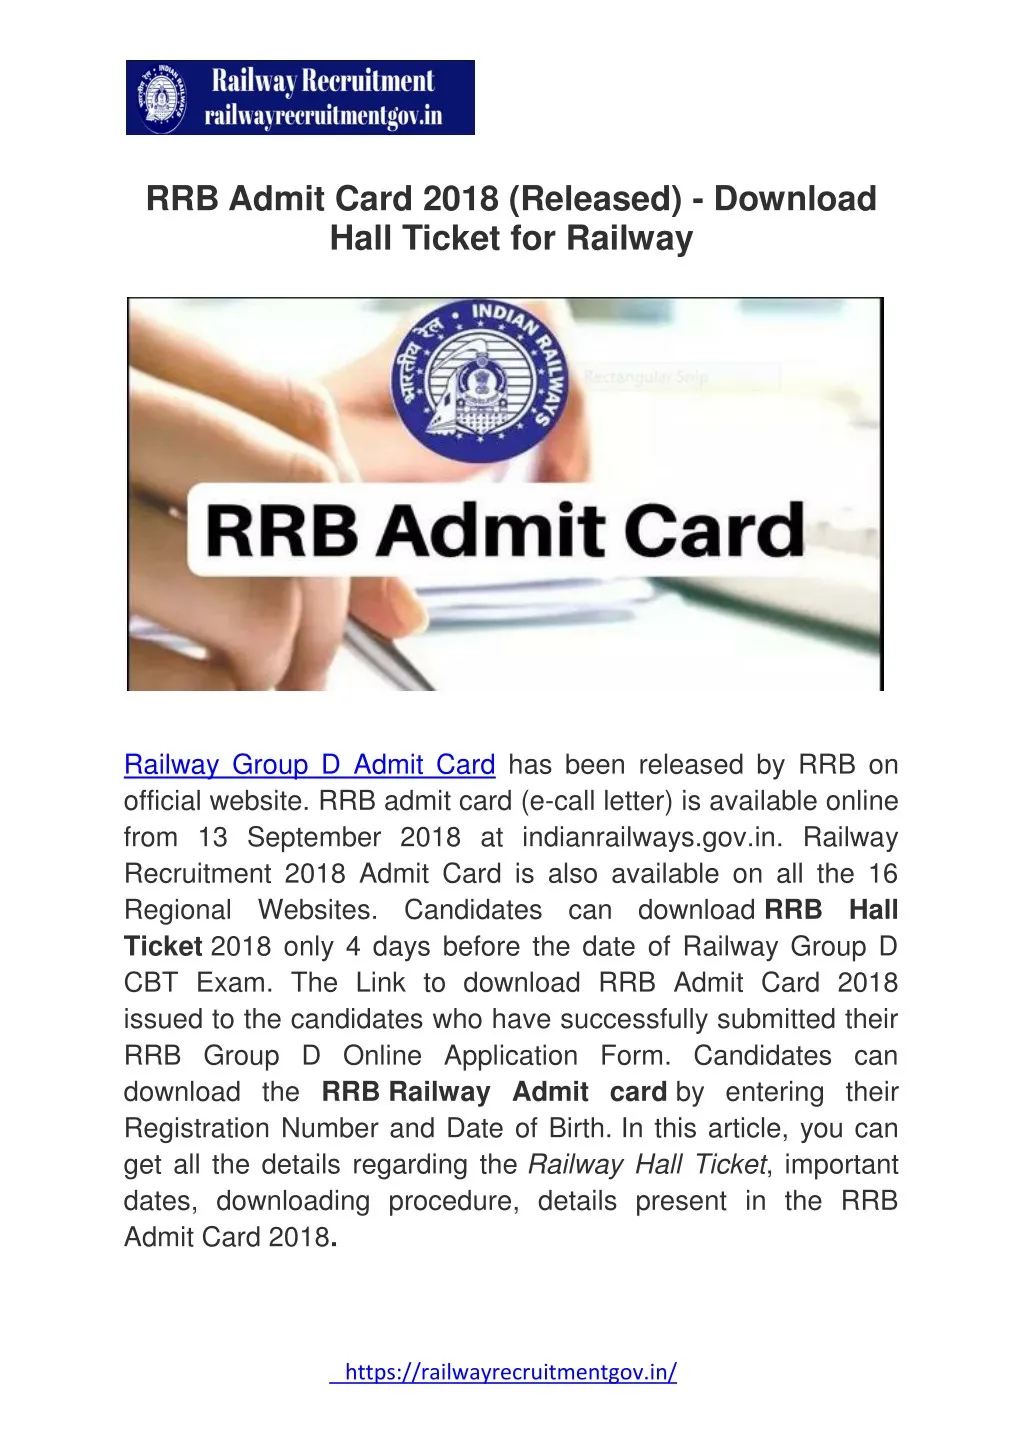 rrb admit card 2018 released download hall ticket